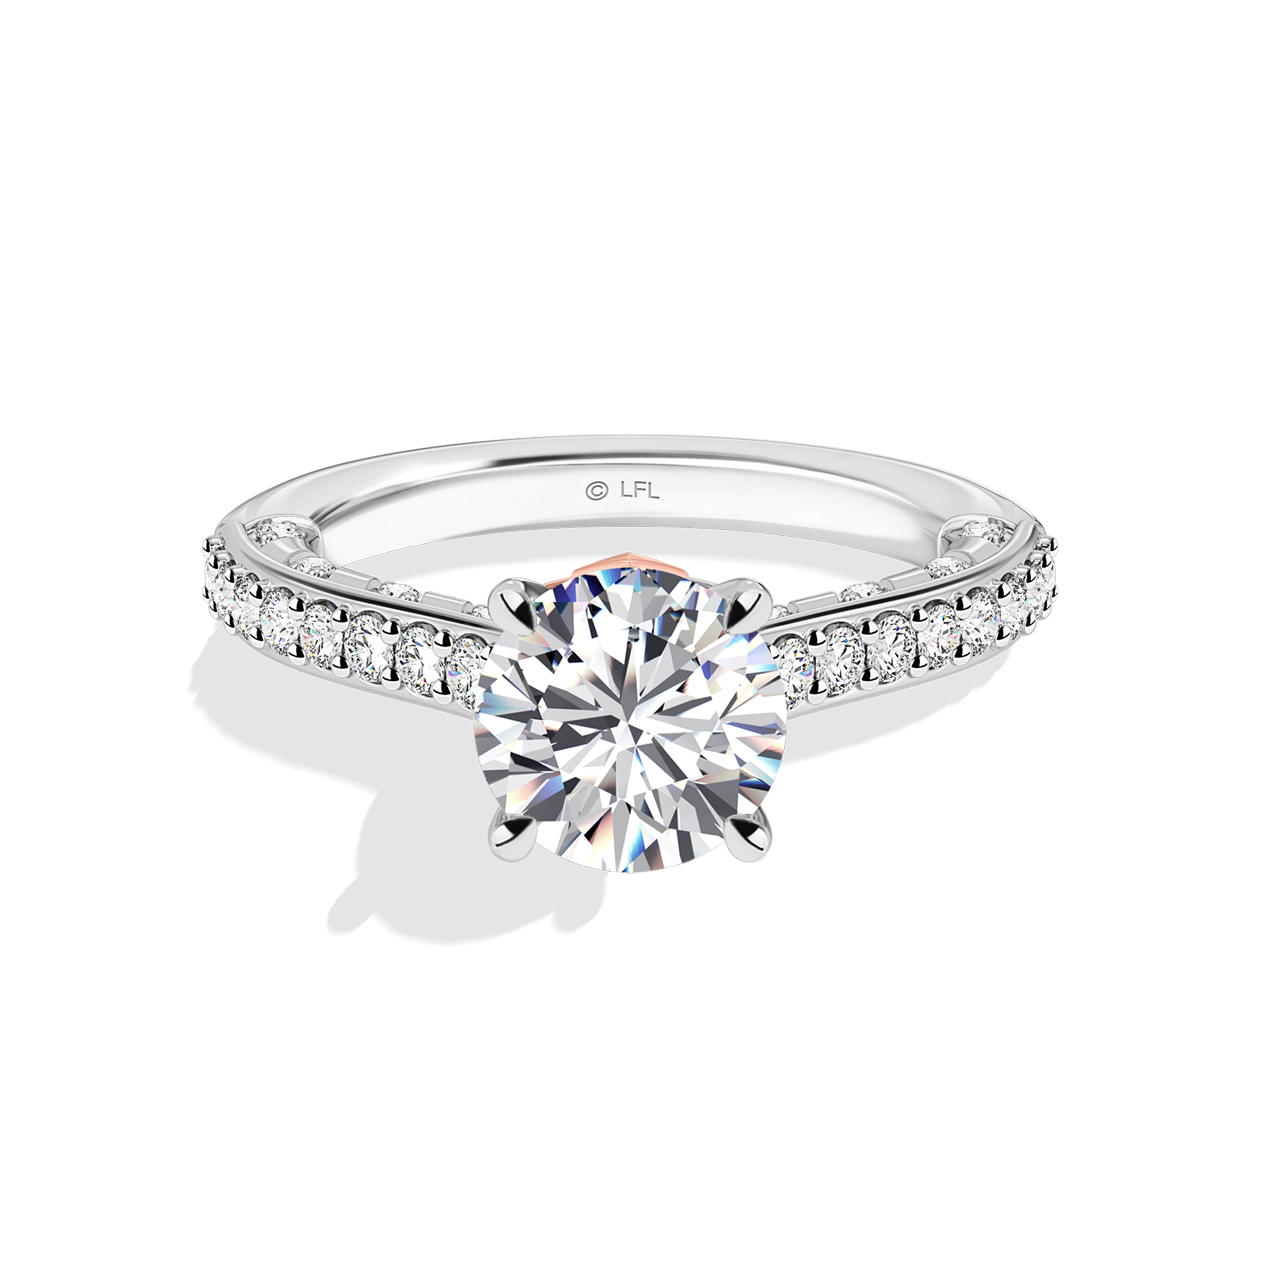 WHITE GOLD PEAR SHAPE DIAMOND ENGAGEMENT RING - Nelson's Jewelers